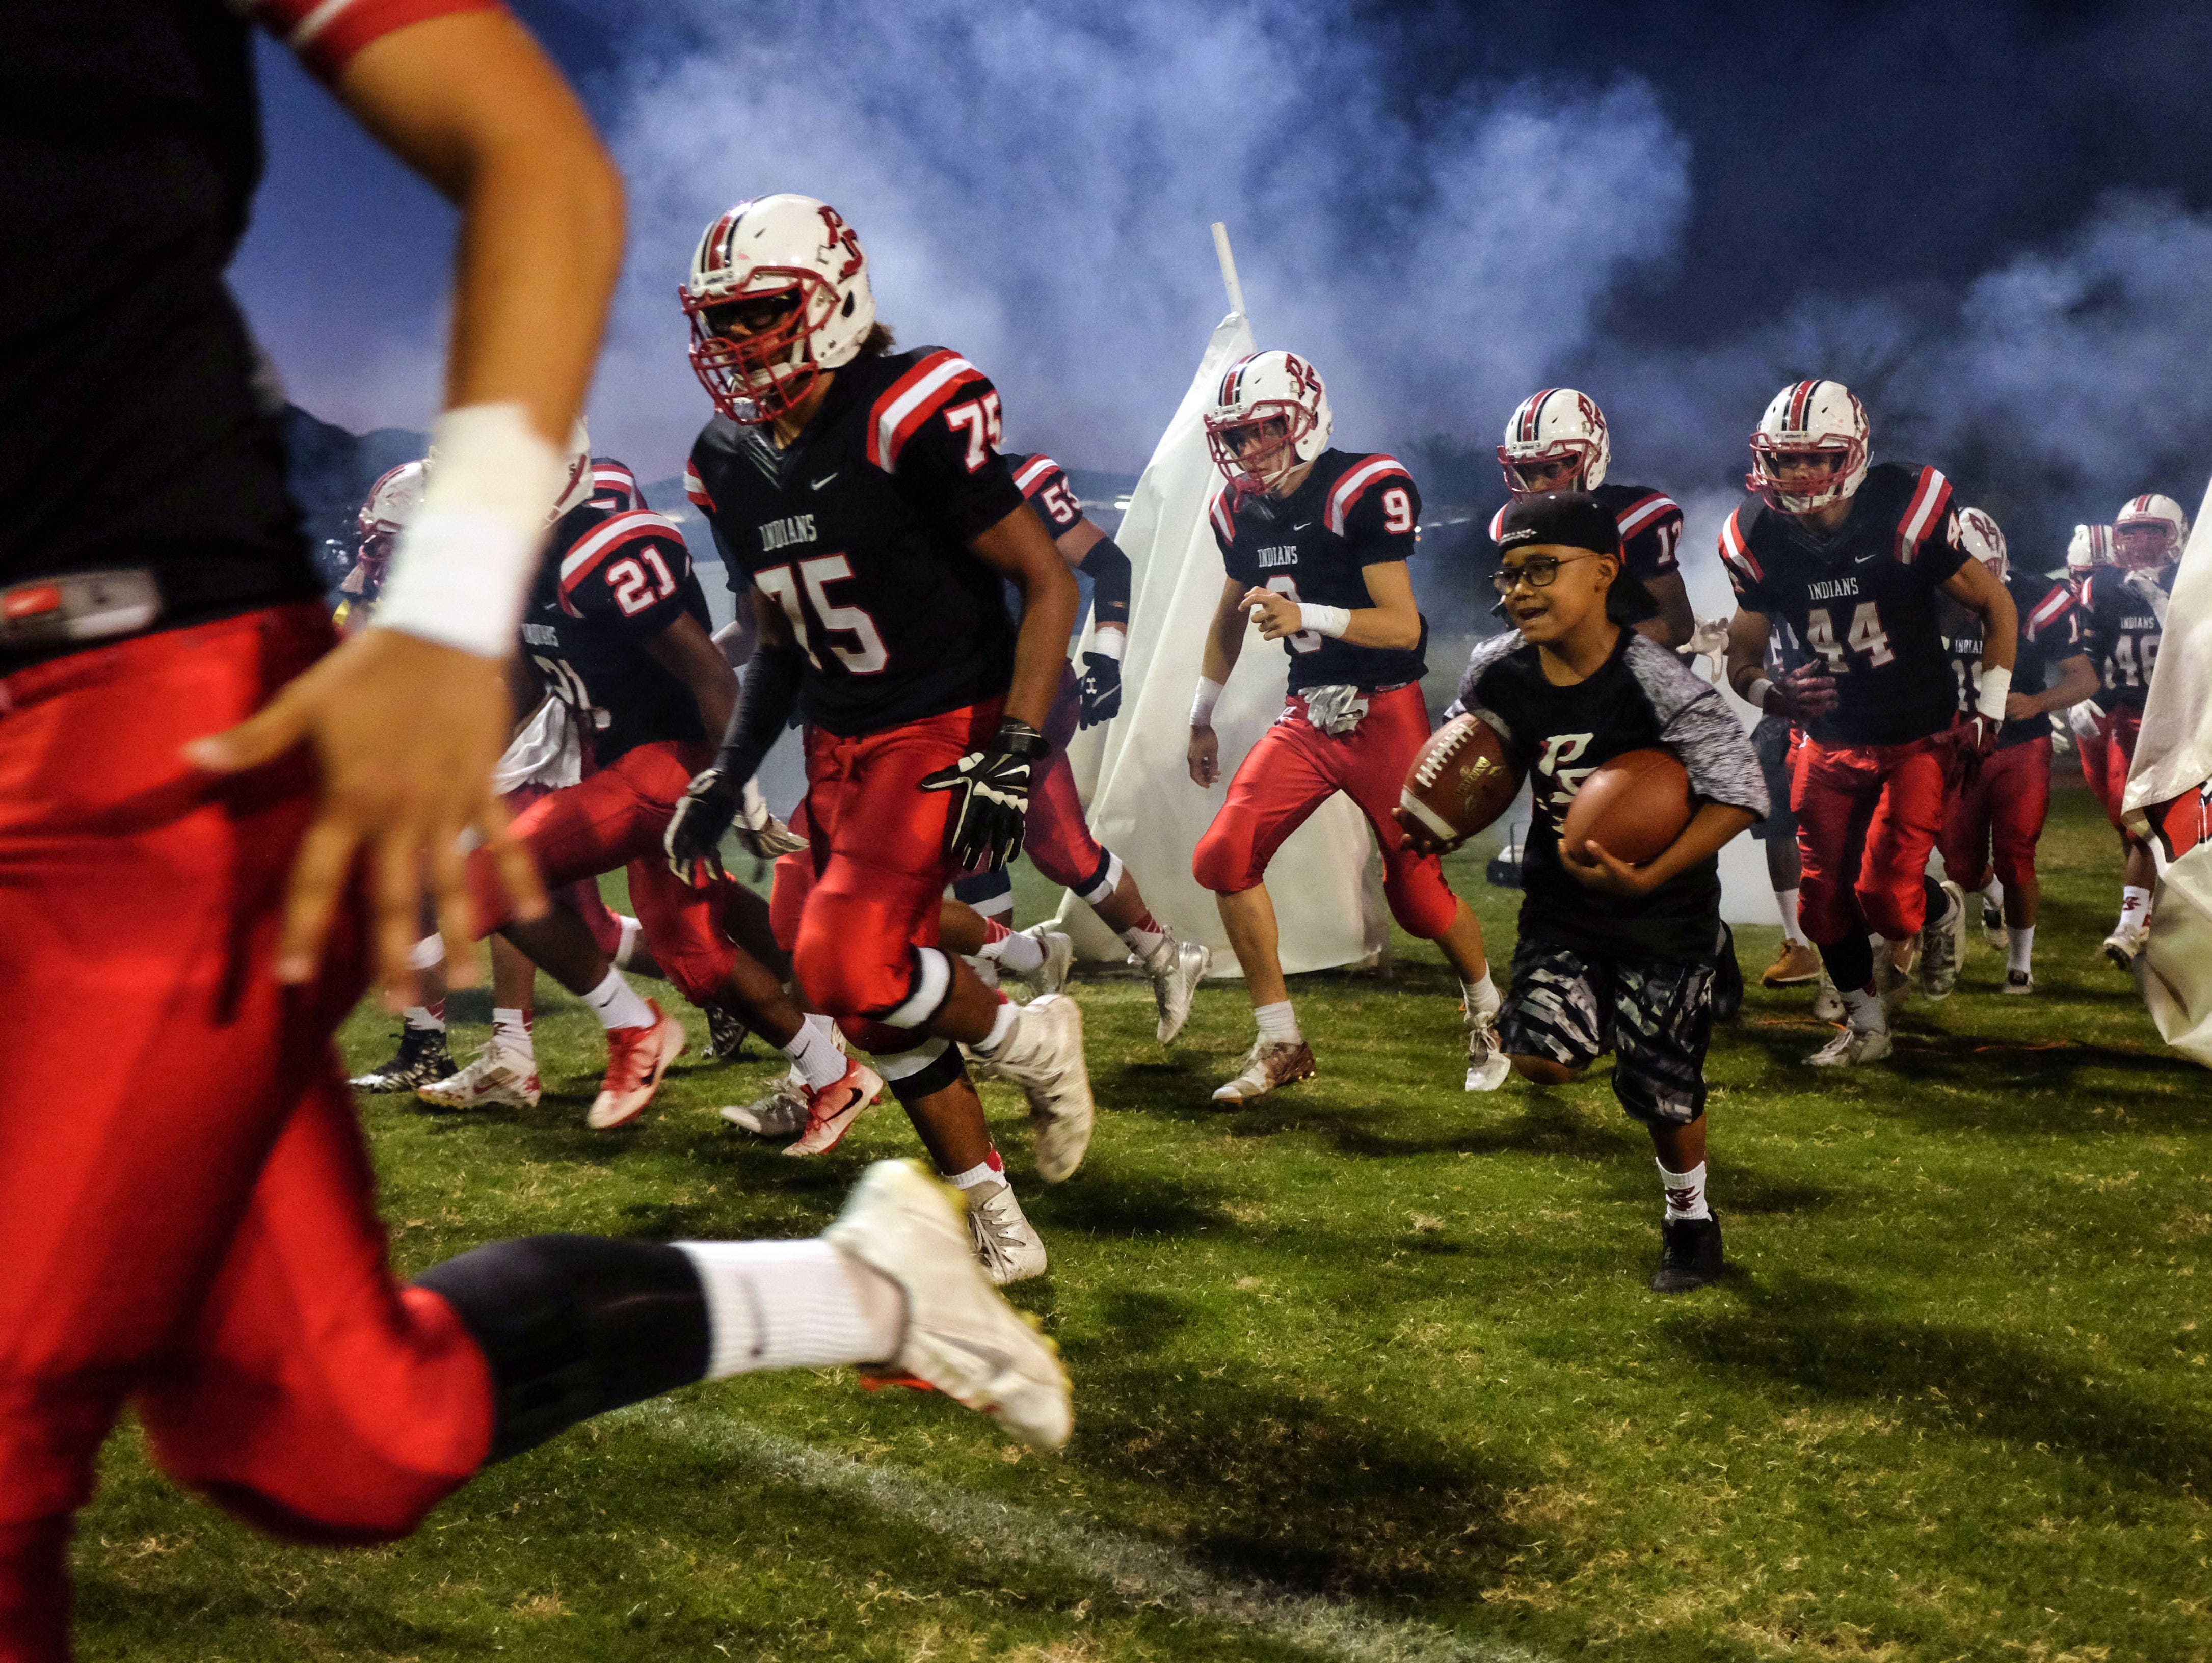 Palm Springs and La Quinta football action on Friday, September 30, 2016 in Palm Springs.